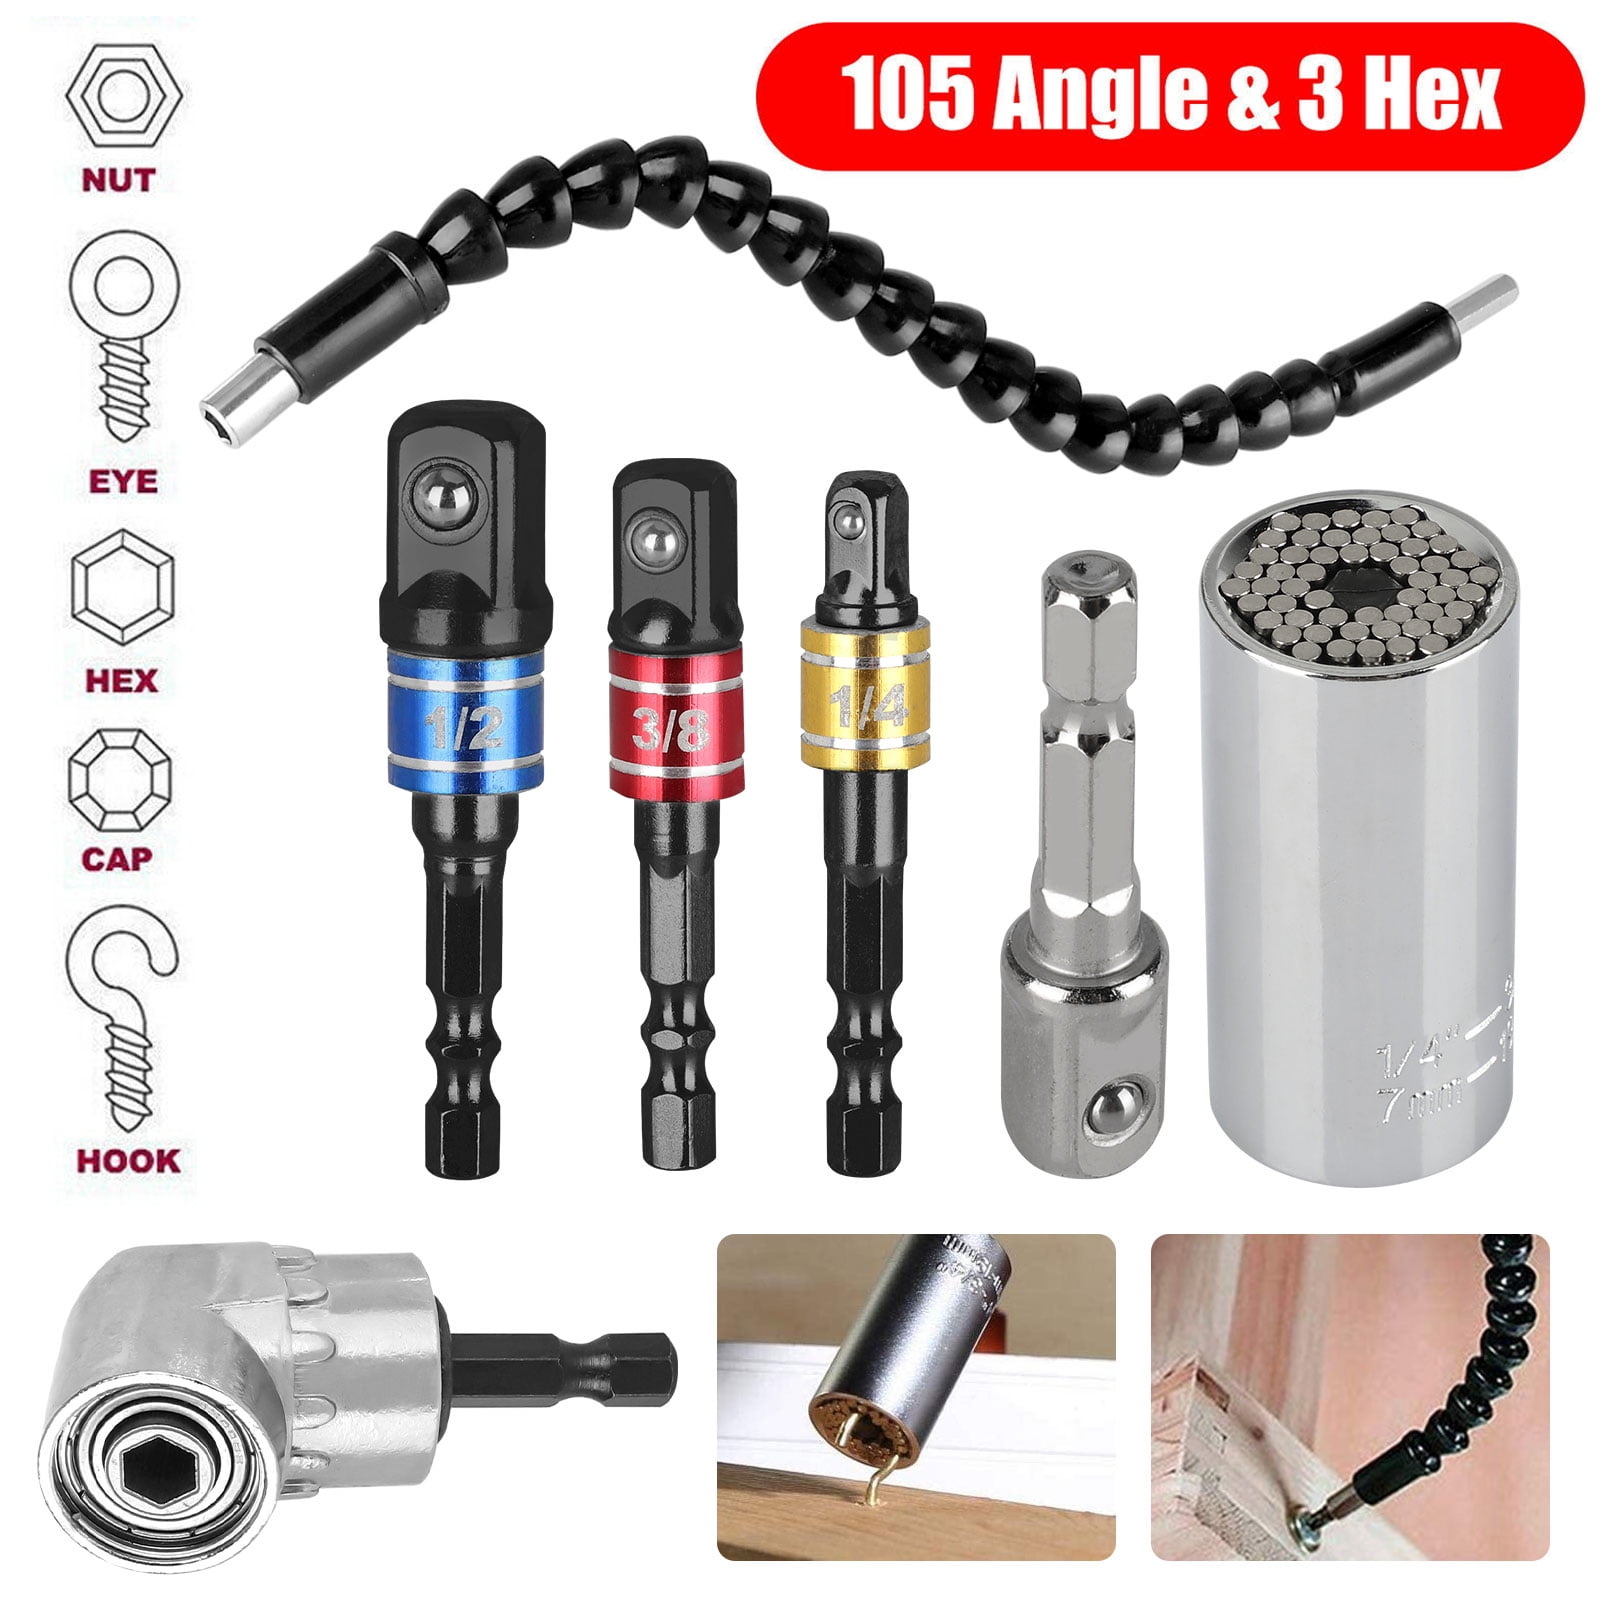 105 Degree Angle Screwdriver Adapter fit for Standard 1/4 inch Hex Drill Bit 